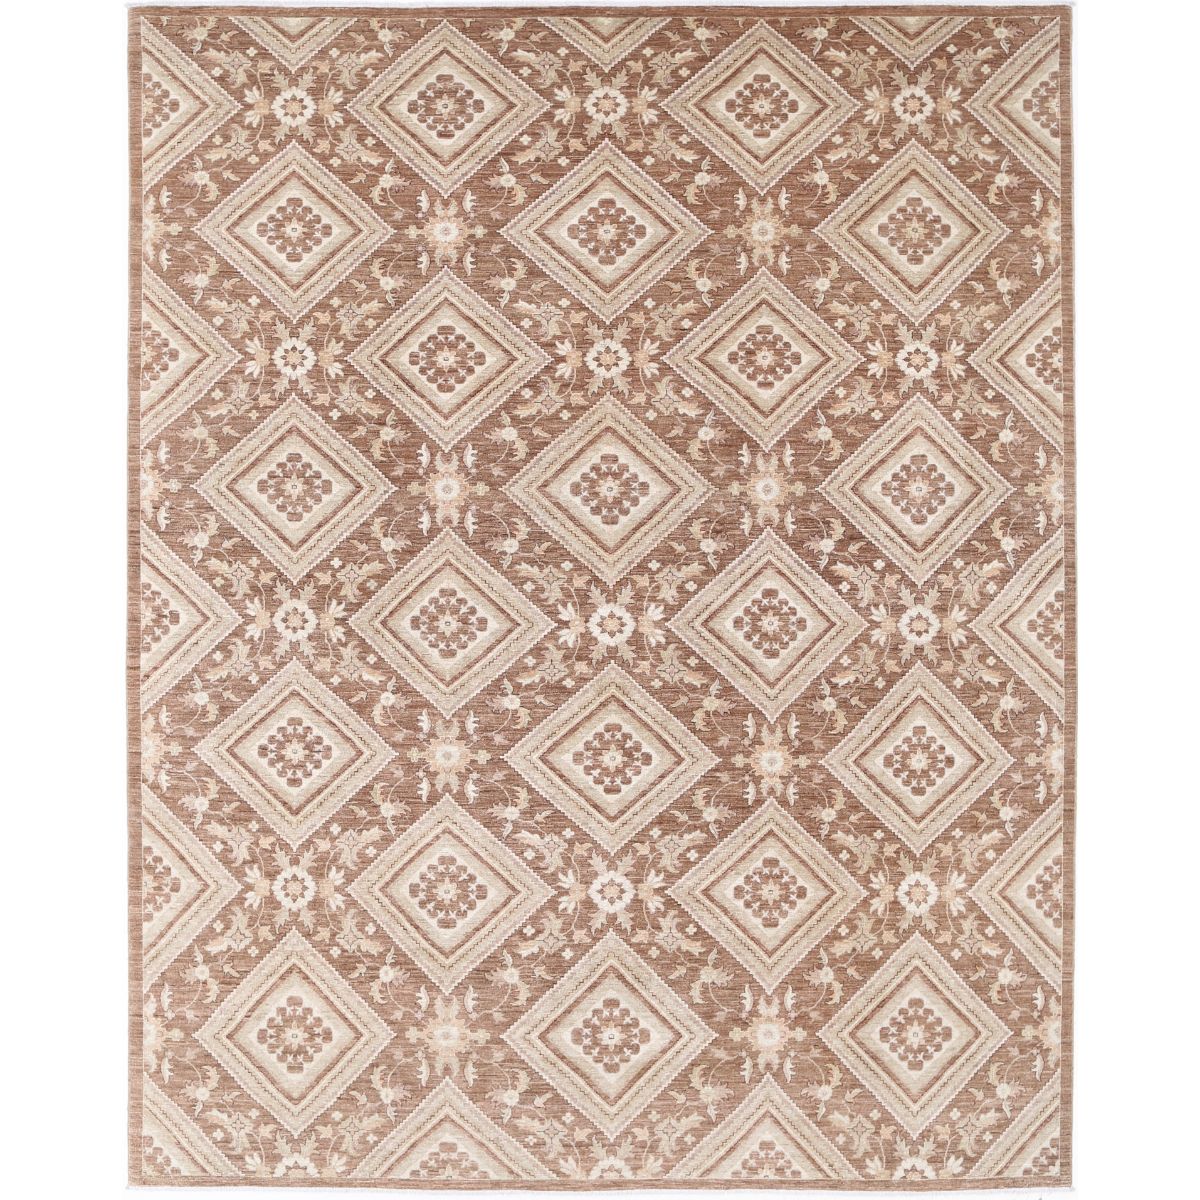 Artemix Collection Hand Knotted Brown 9'0" X 11'6" Rectangle Tabriz Design Wool Rug